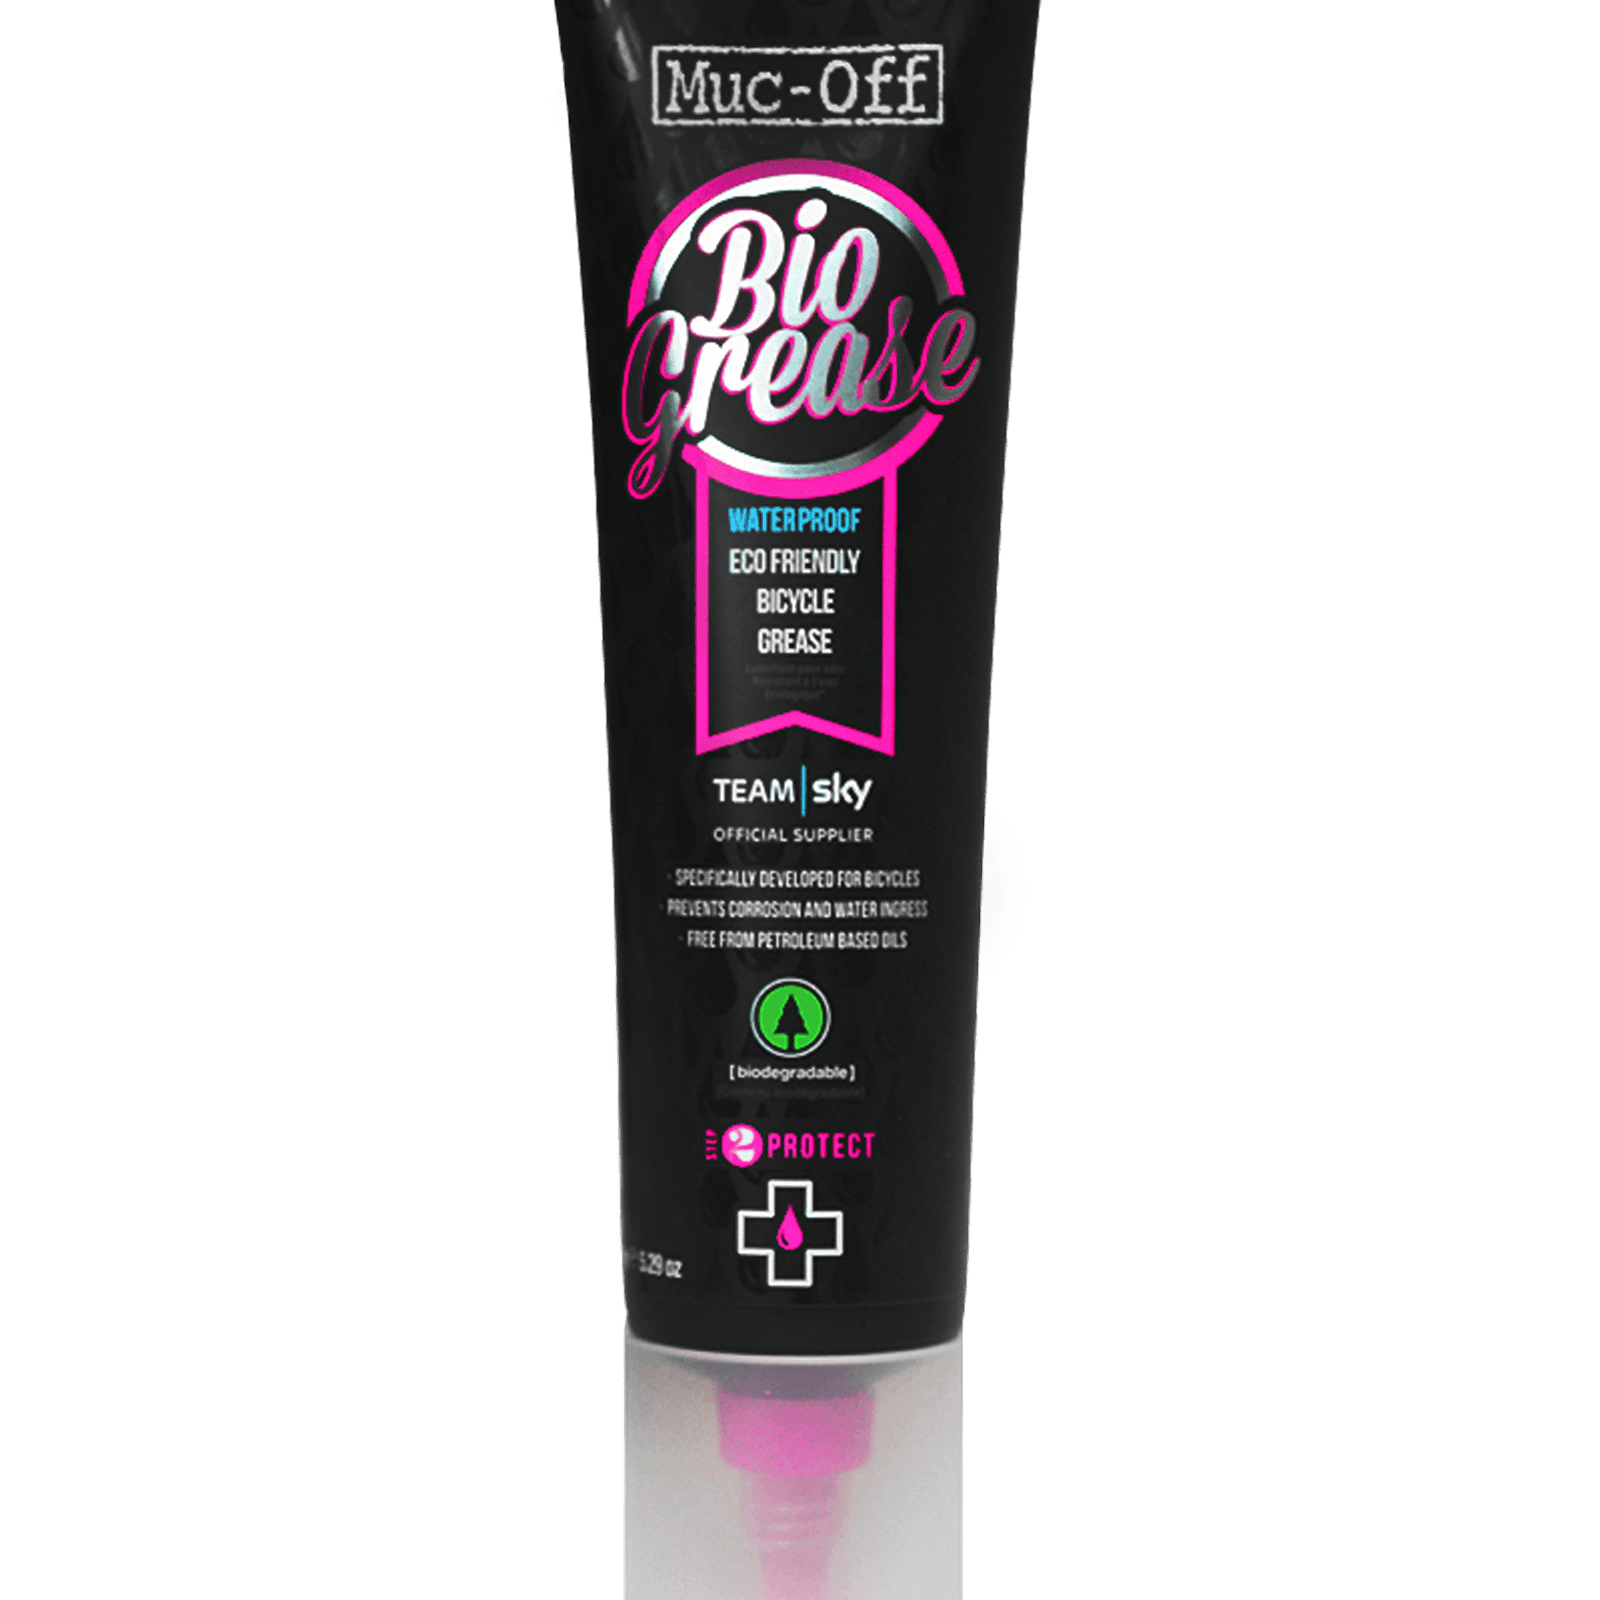 Muc-Off Bio Grease 150g Accessories - Maintenance - Grease